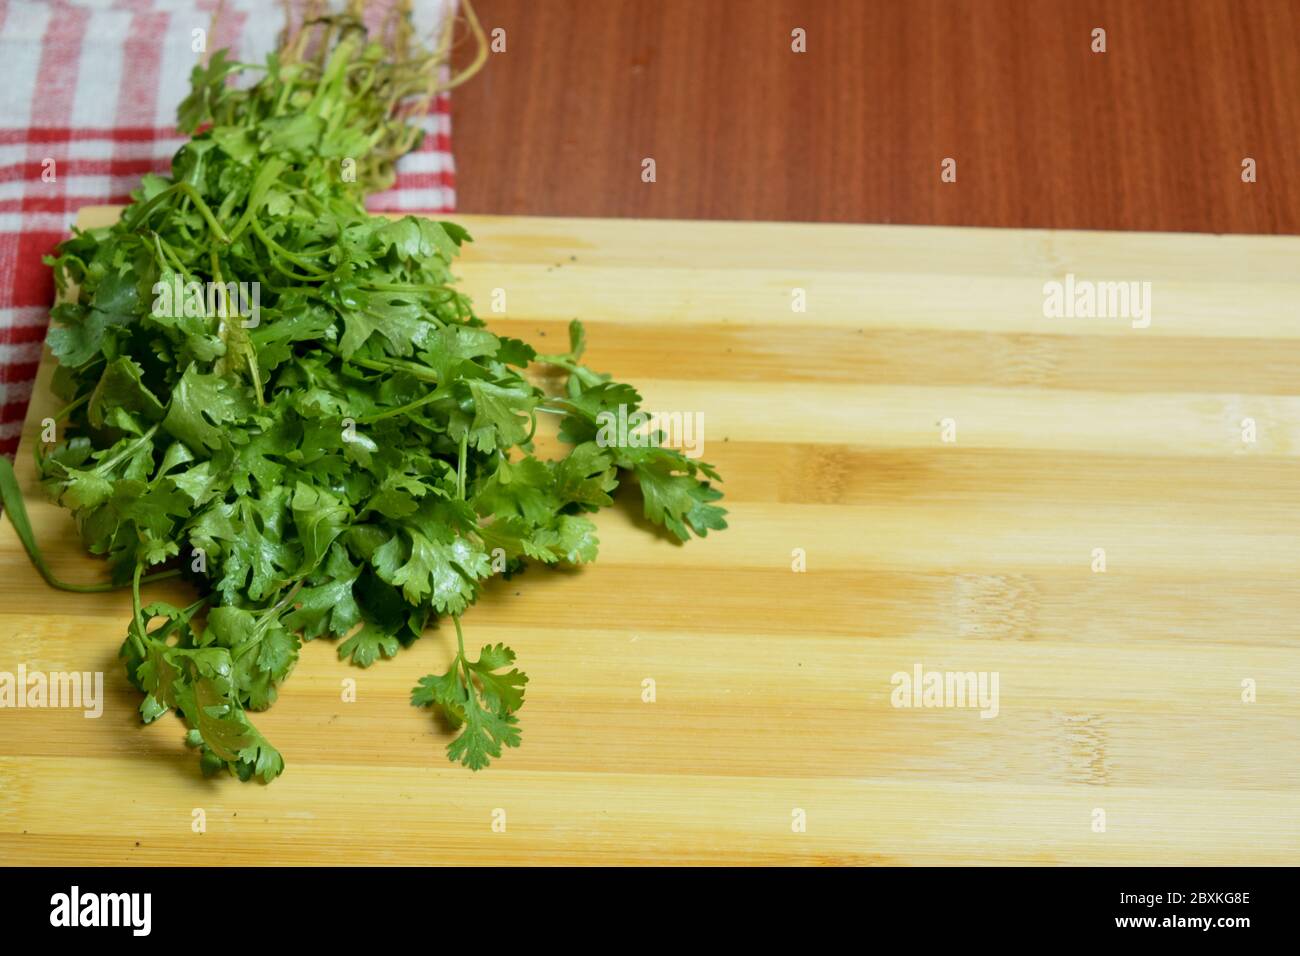 Fresh Coriander Leaves, Green Cilantro on Wooden Surface Stock Photo